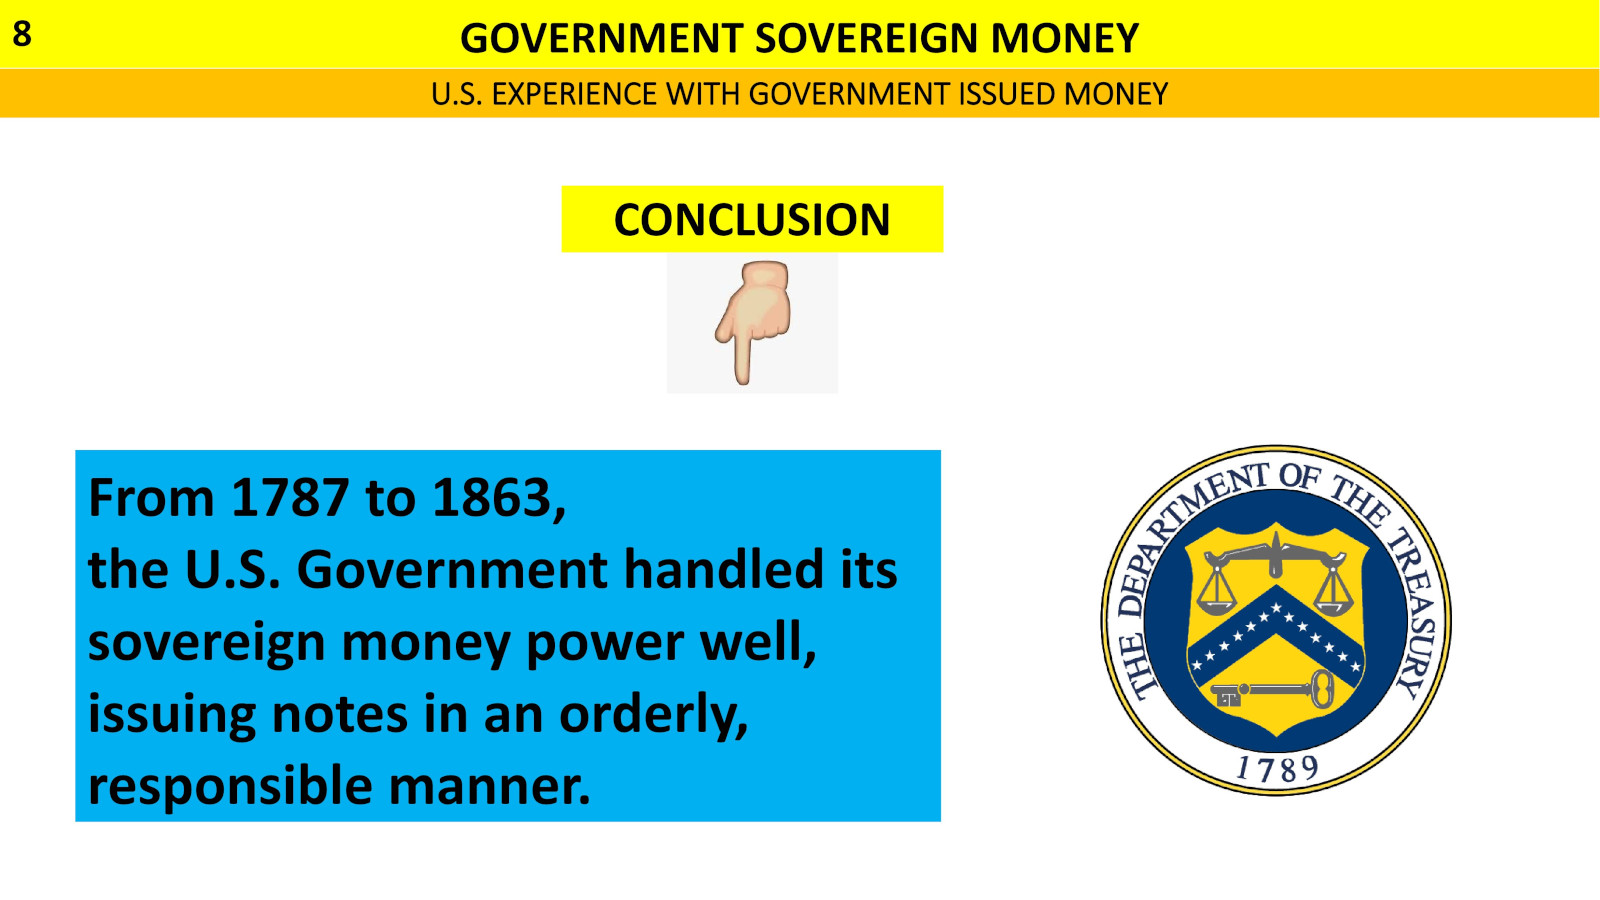 History shows that U.S. government issued money has been managed responsibly.